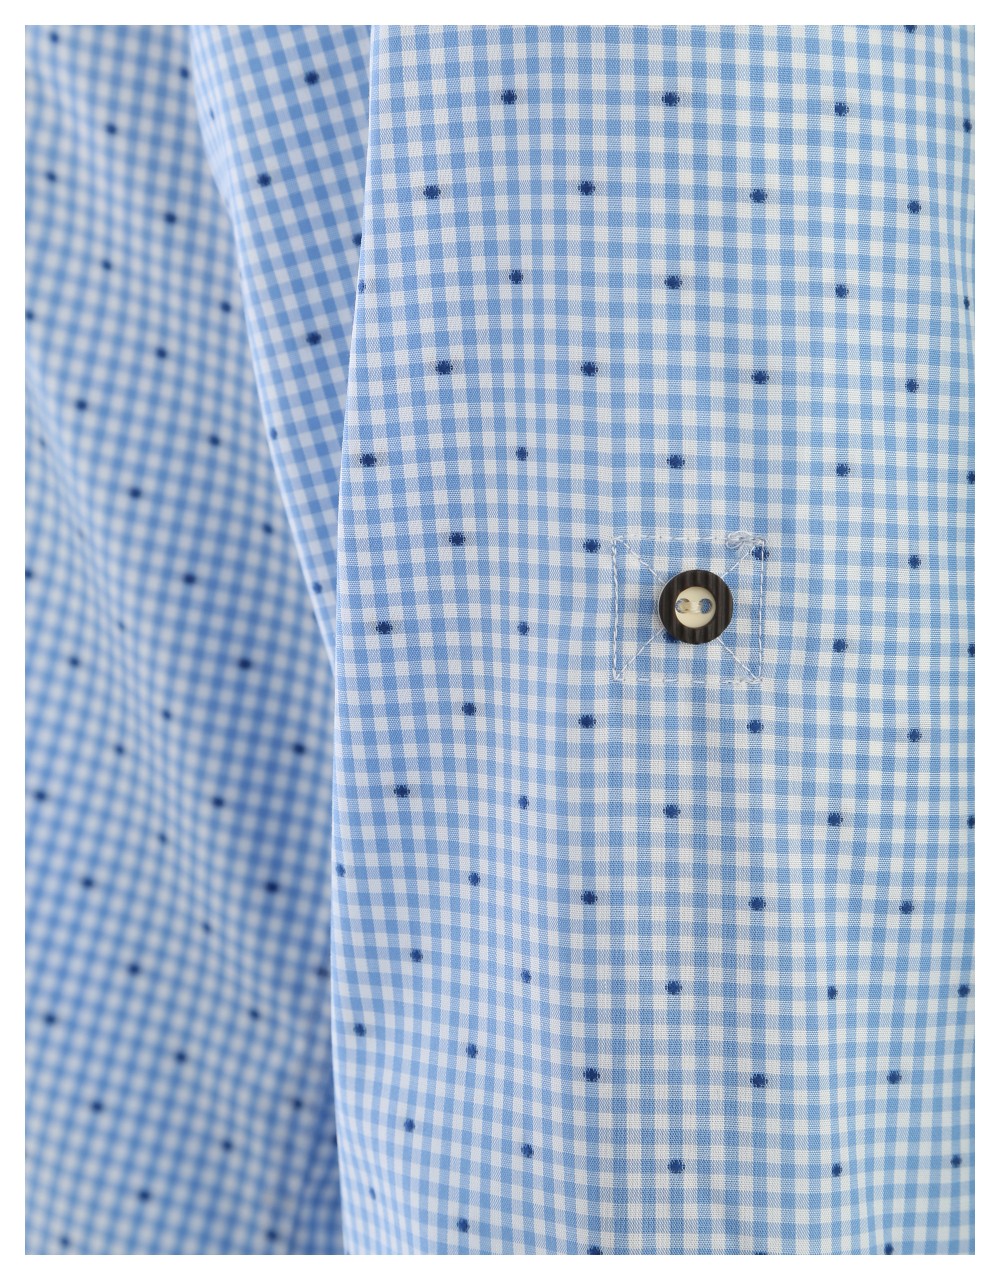 Preview: Trachten Shirt Olymp, blue-white checked